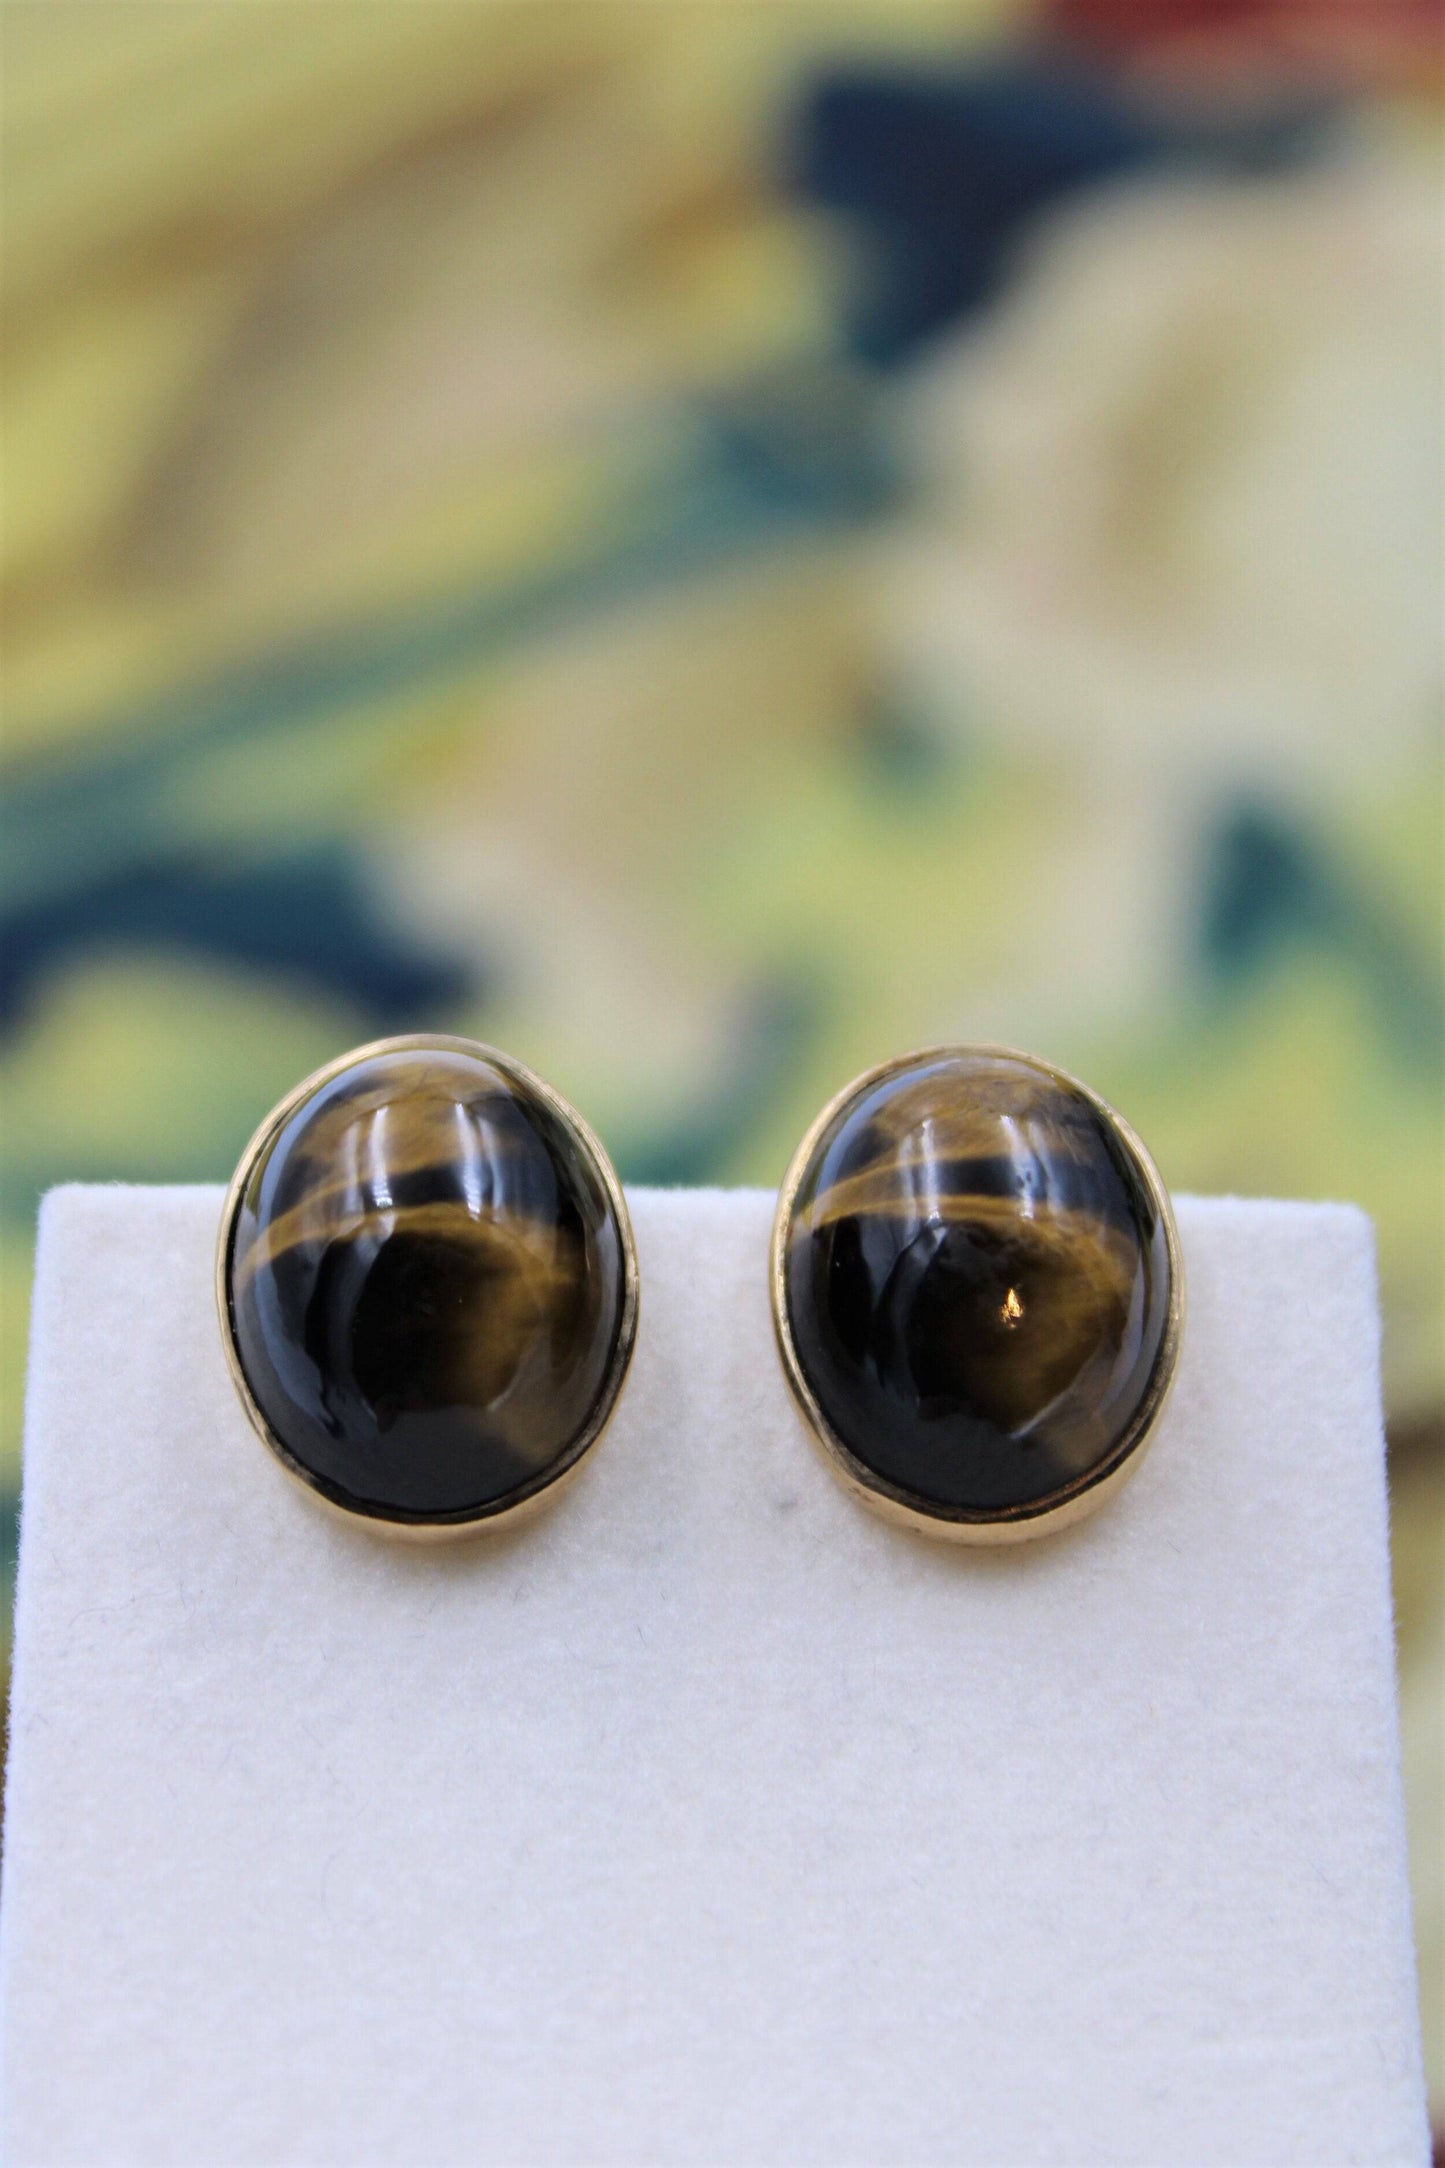 A fine pair of Oval "Tigers Eye" Earrings set in 9ct Yellow Gold, English, Circa 1950 - Robin Haydock Antiques